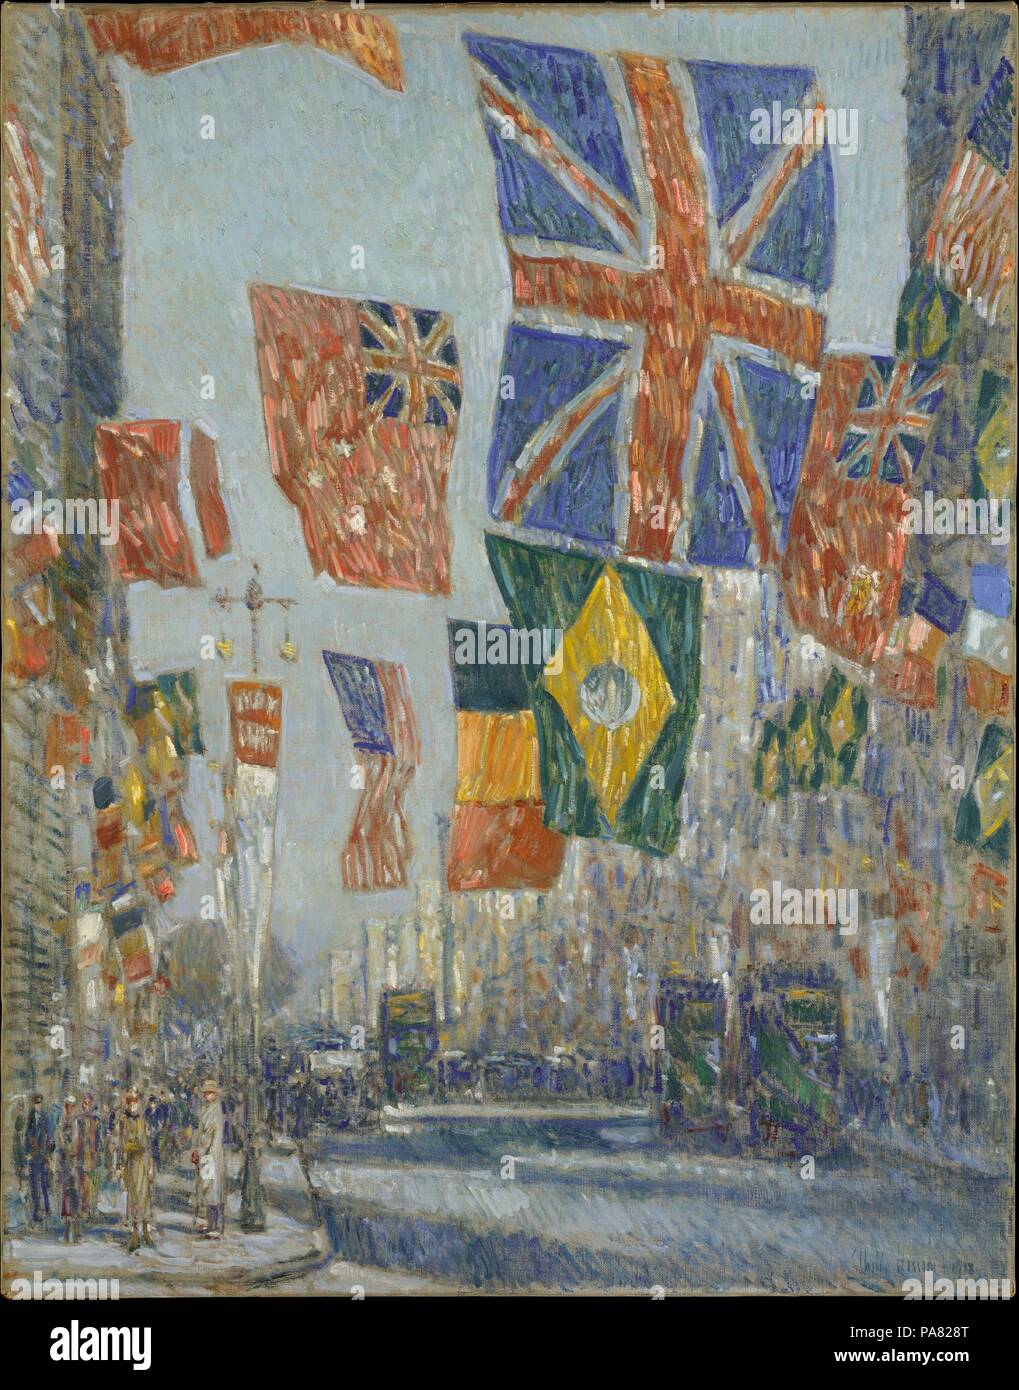 Avenue of the Allies, Great Britain, 1918. Artist: Childe Hassam (American, Dorchester, Massachusetts 1859-1935 East Hampton, New York). Dimensions: 36 x 28 3/8 in. (91.4 x 72.1 cm). Date: 1918.  The only major American Impressionist to depict the home front during World War I, Hassam produced his Flag series, some thirty canvases representing Manhattan's Fifth Avenue and adjacent streets decorated with patriotic emblems, from 1916 to 1919. For Liberty Loan drives, organized by the United States government to promote the sale of savings bonds, stretches of Fifth Avenue were draped with flags a Stock Photo